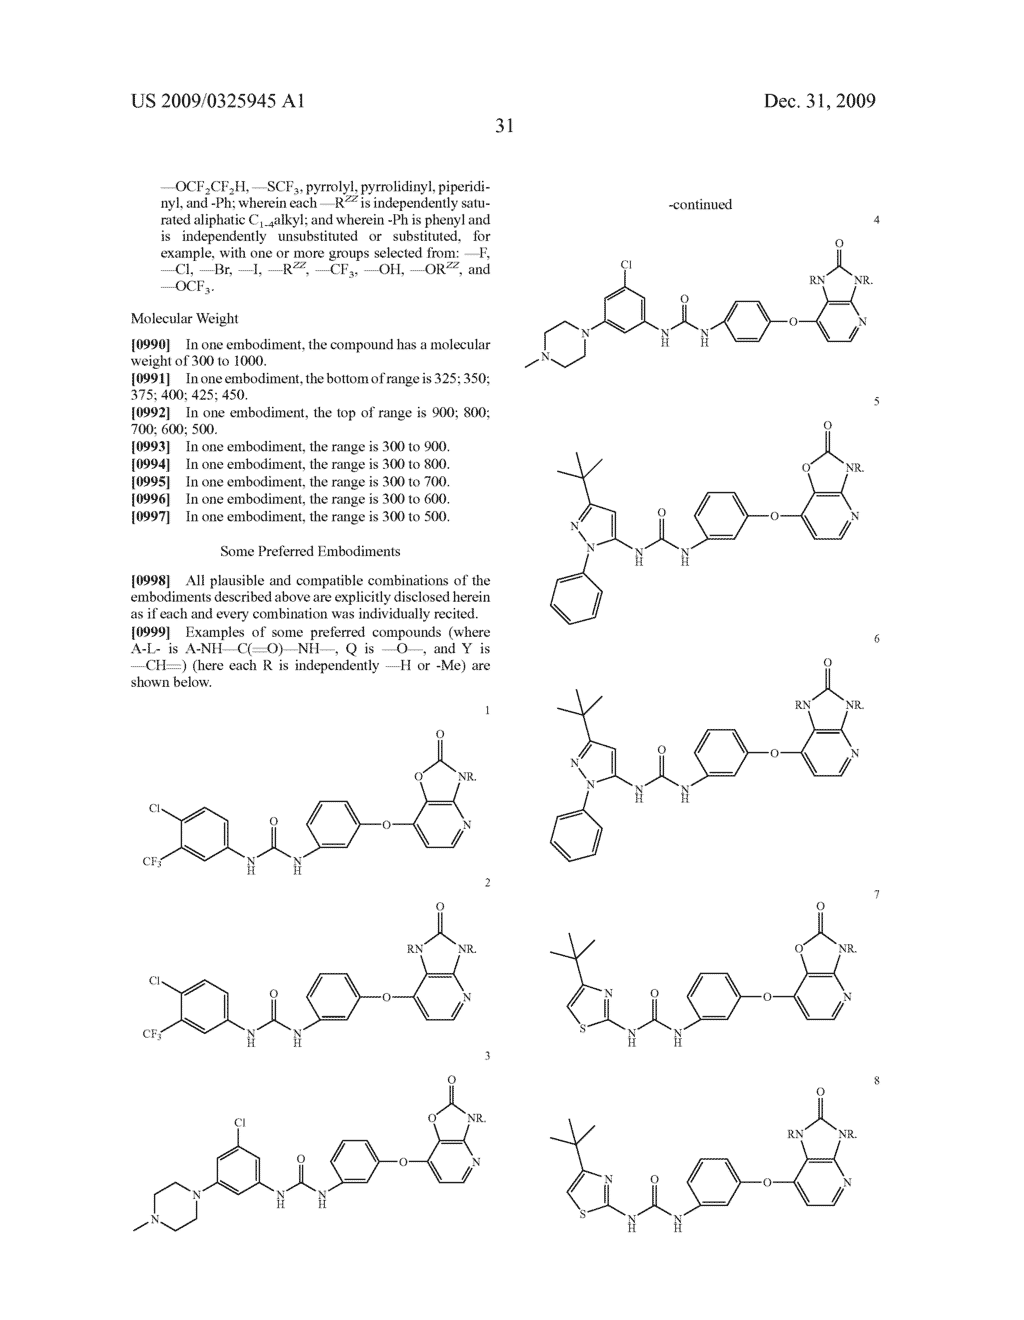 IMIDAZO[4, 5-B]PYRIDIN-2-ONE AND OXAZOLO[4, 5-B]PYRIDIN-2-ONE COMPOUNDS AND ANALOGS THEREOF AS CANCER THERAPEUTIC COMPOUNDS - diagram, schematic, and image 32